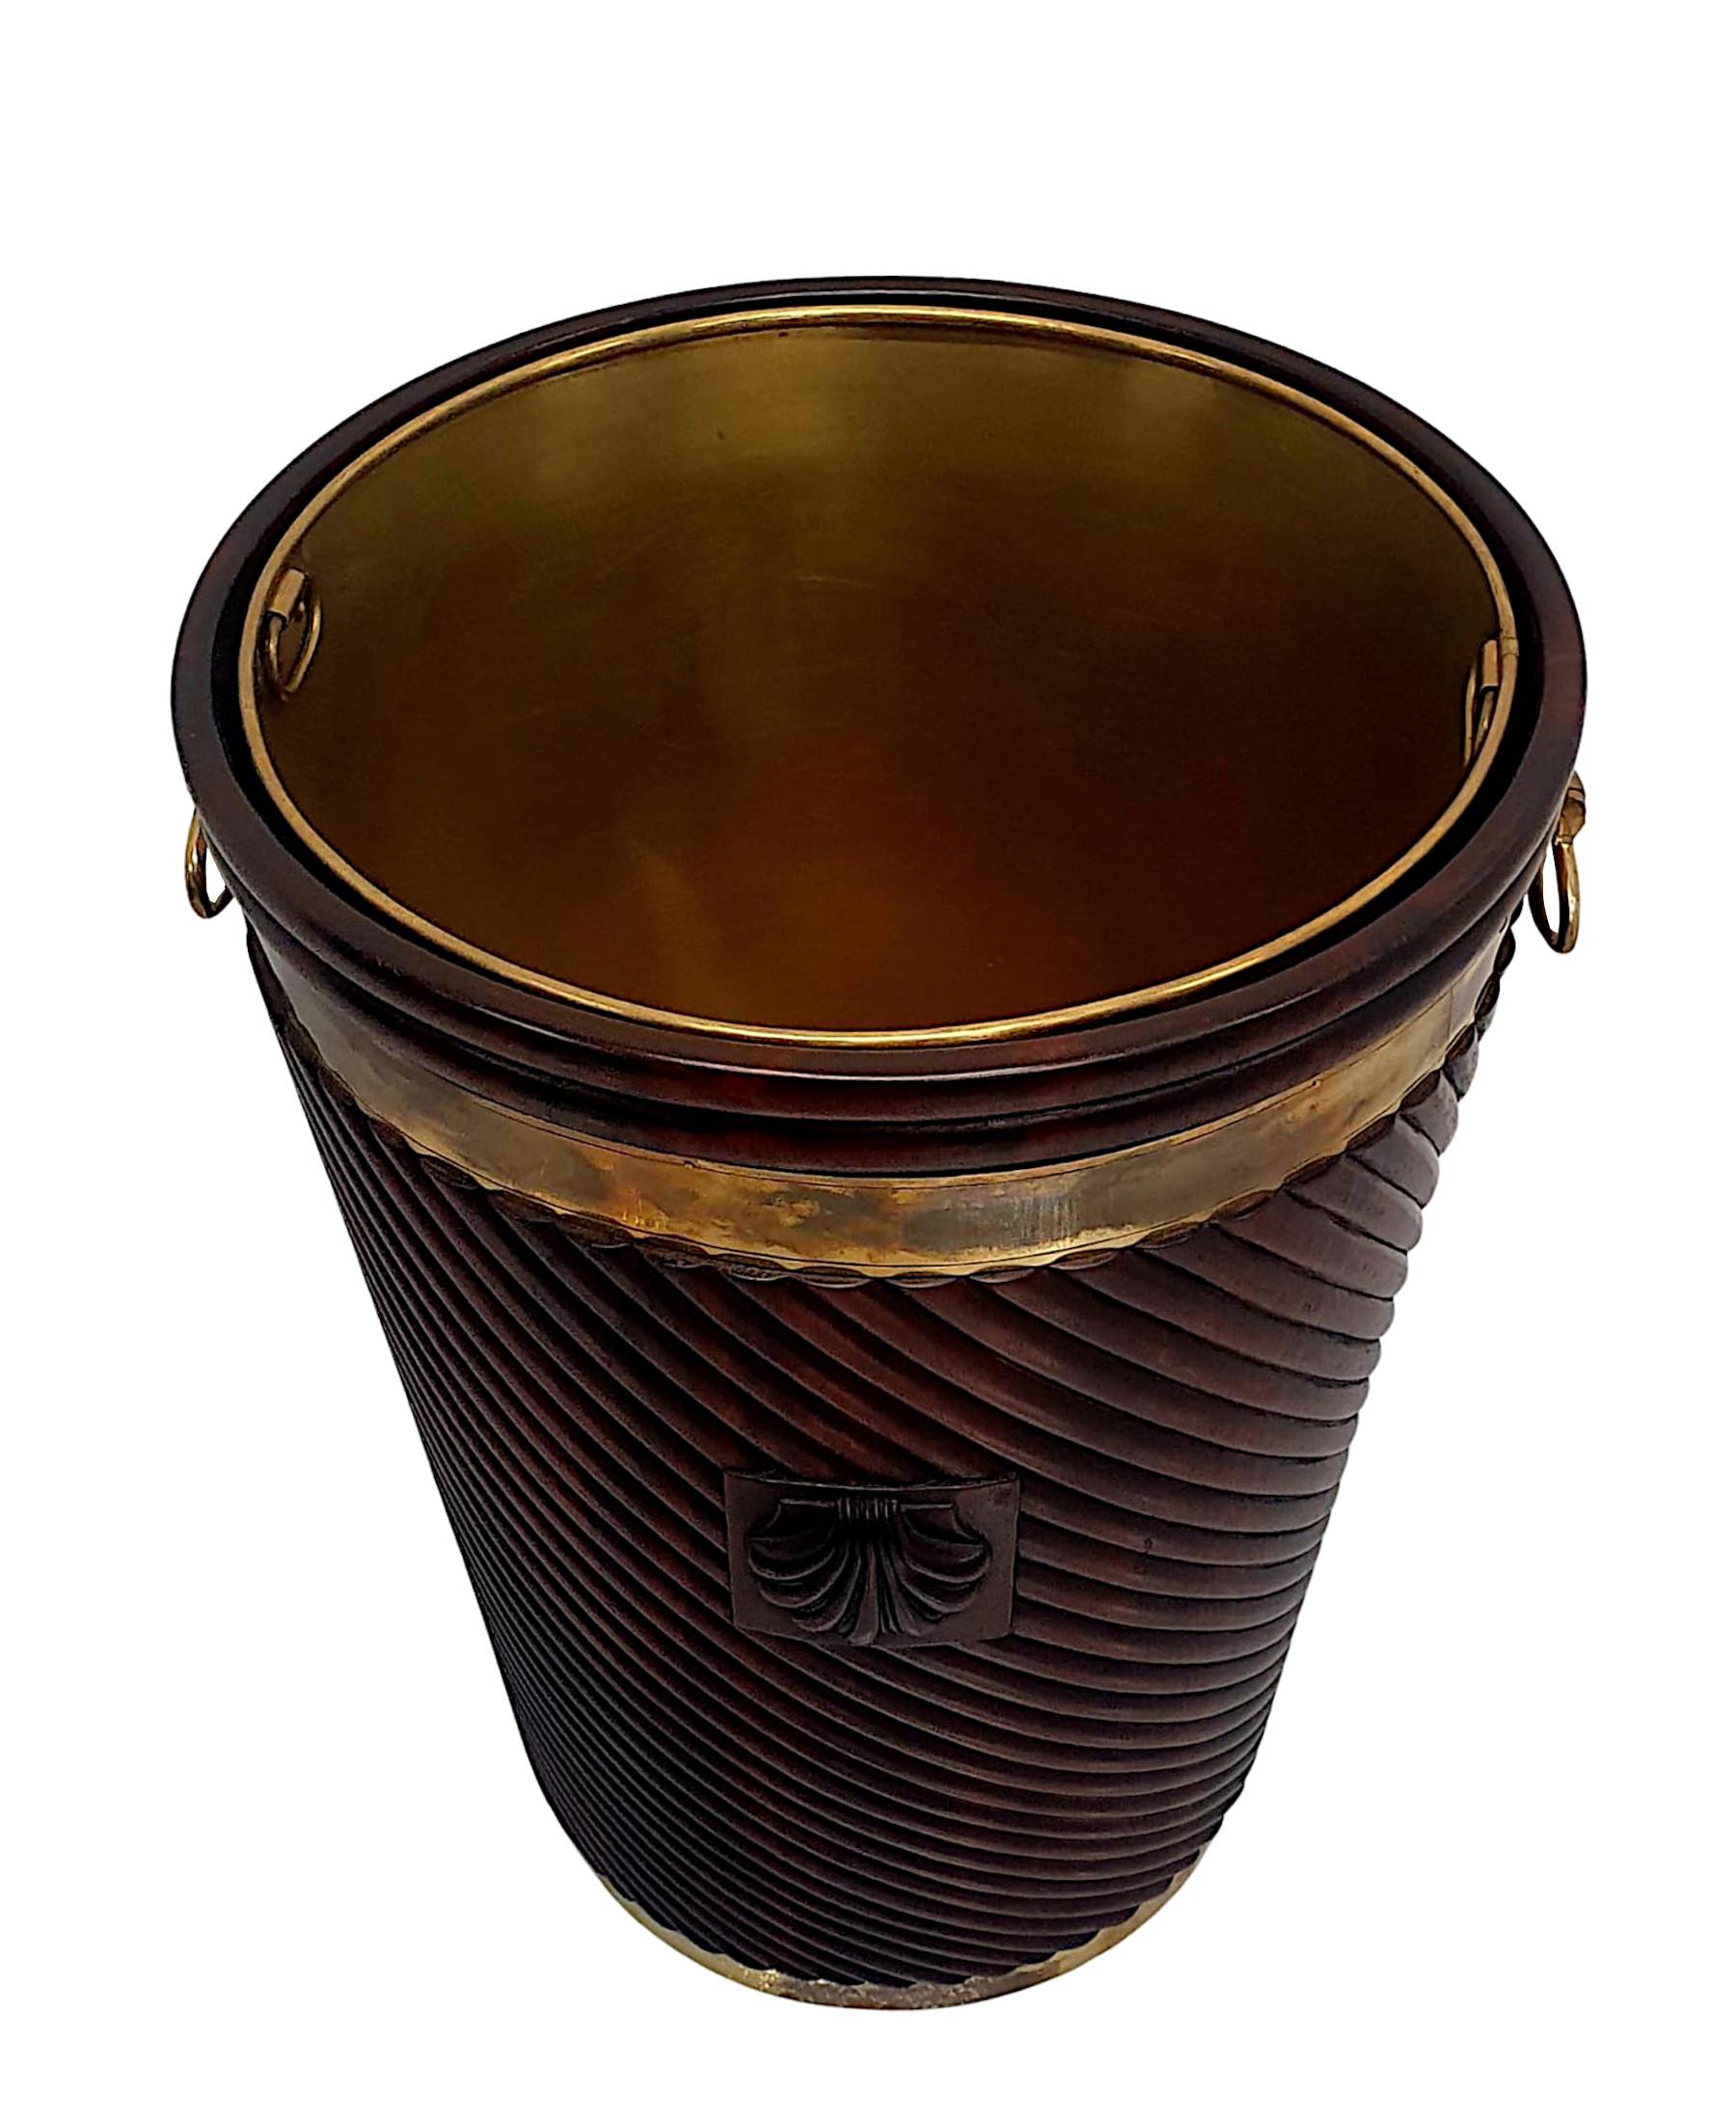 A stunning Irish design mahogany brass bound peat bucket of fabulous quality, large proportions and finely hand carved with rich patination and grain.  The moulded and reeded, brass bound body incorporates a gorgeous spiral twist pattern detail and